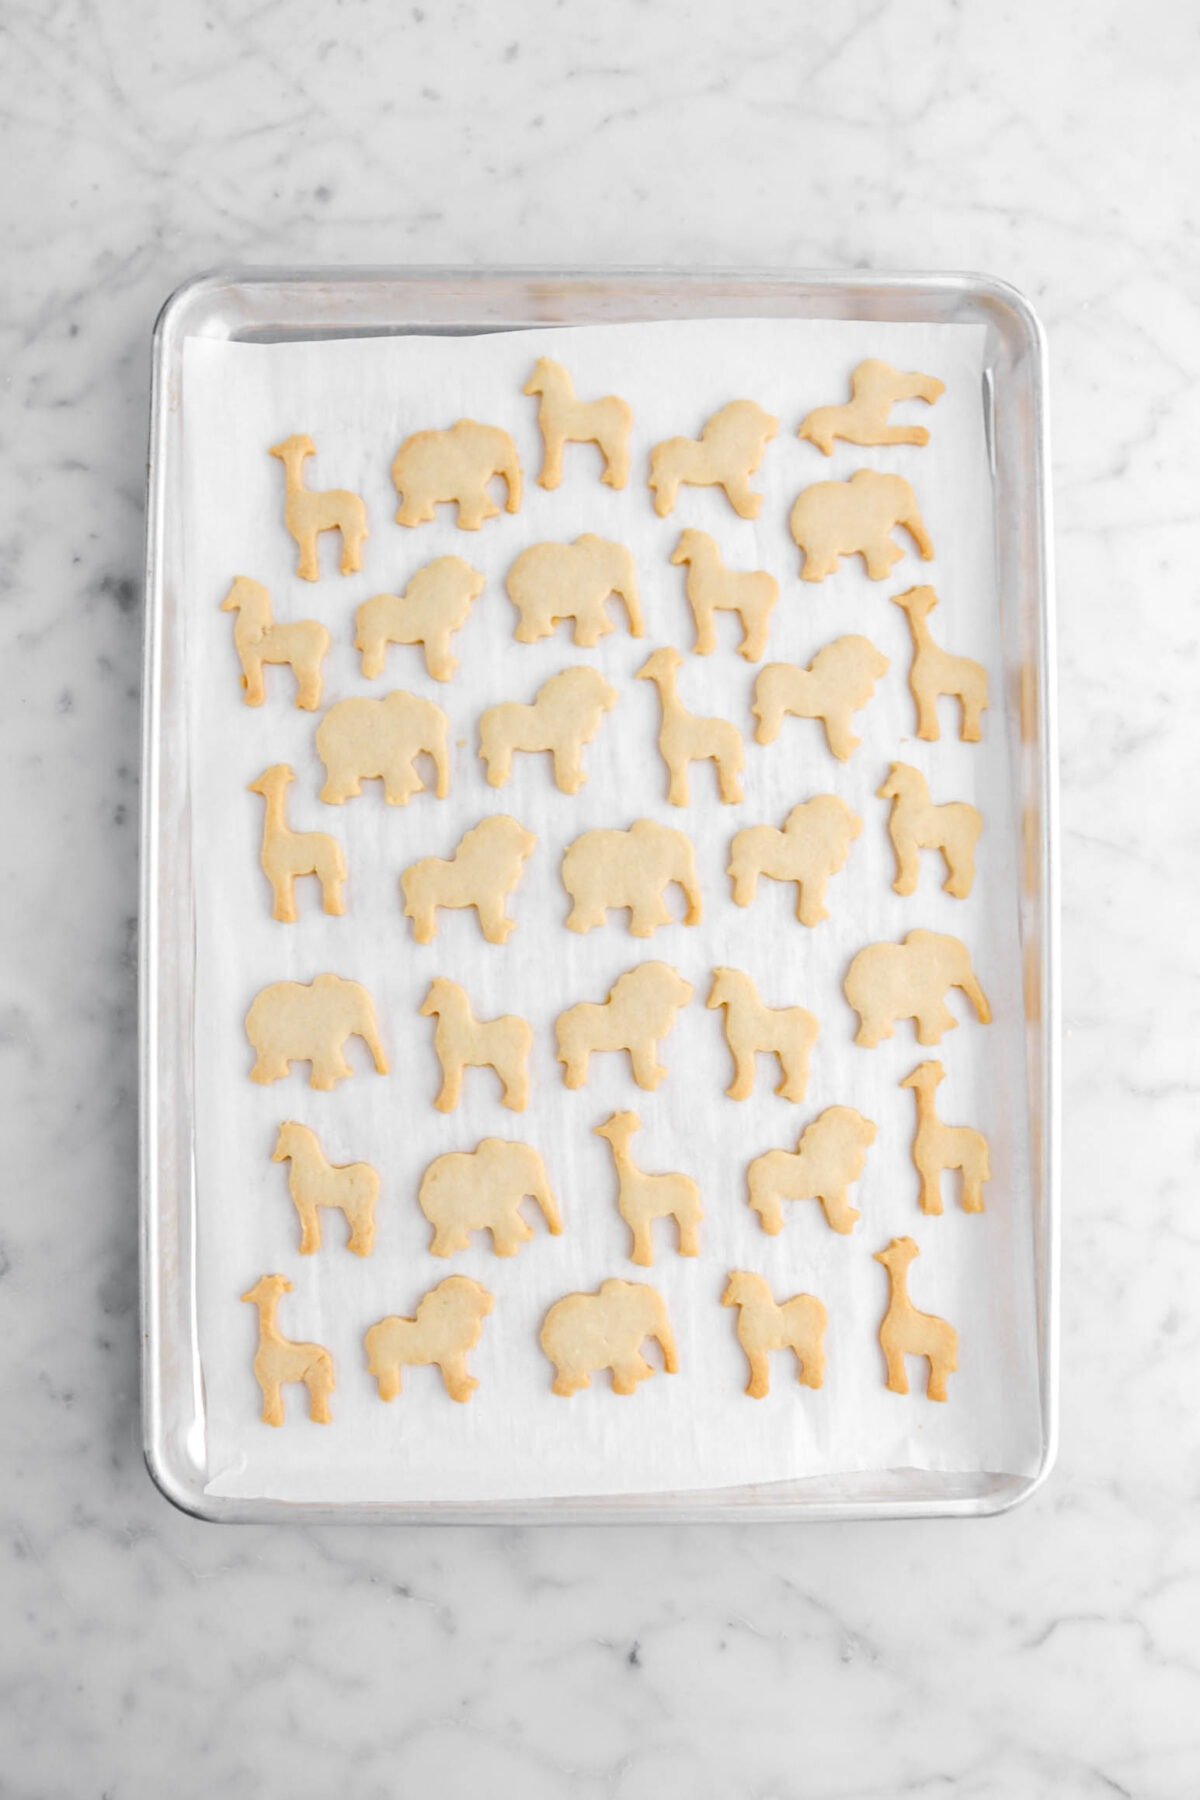 baked animal cookies on parchment lined sheet pan.